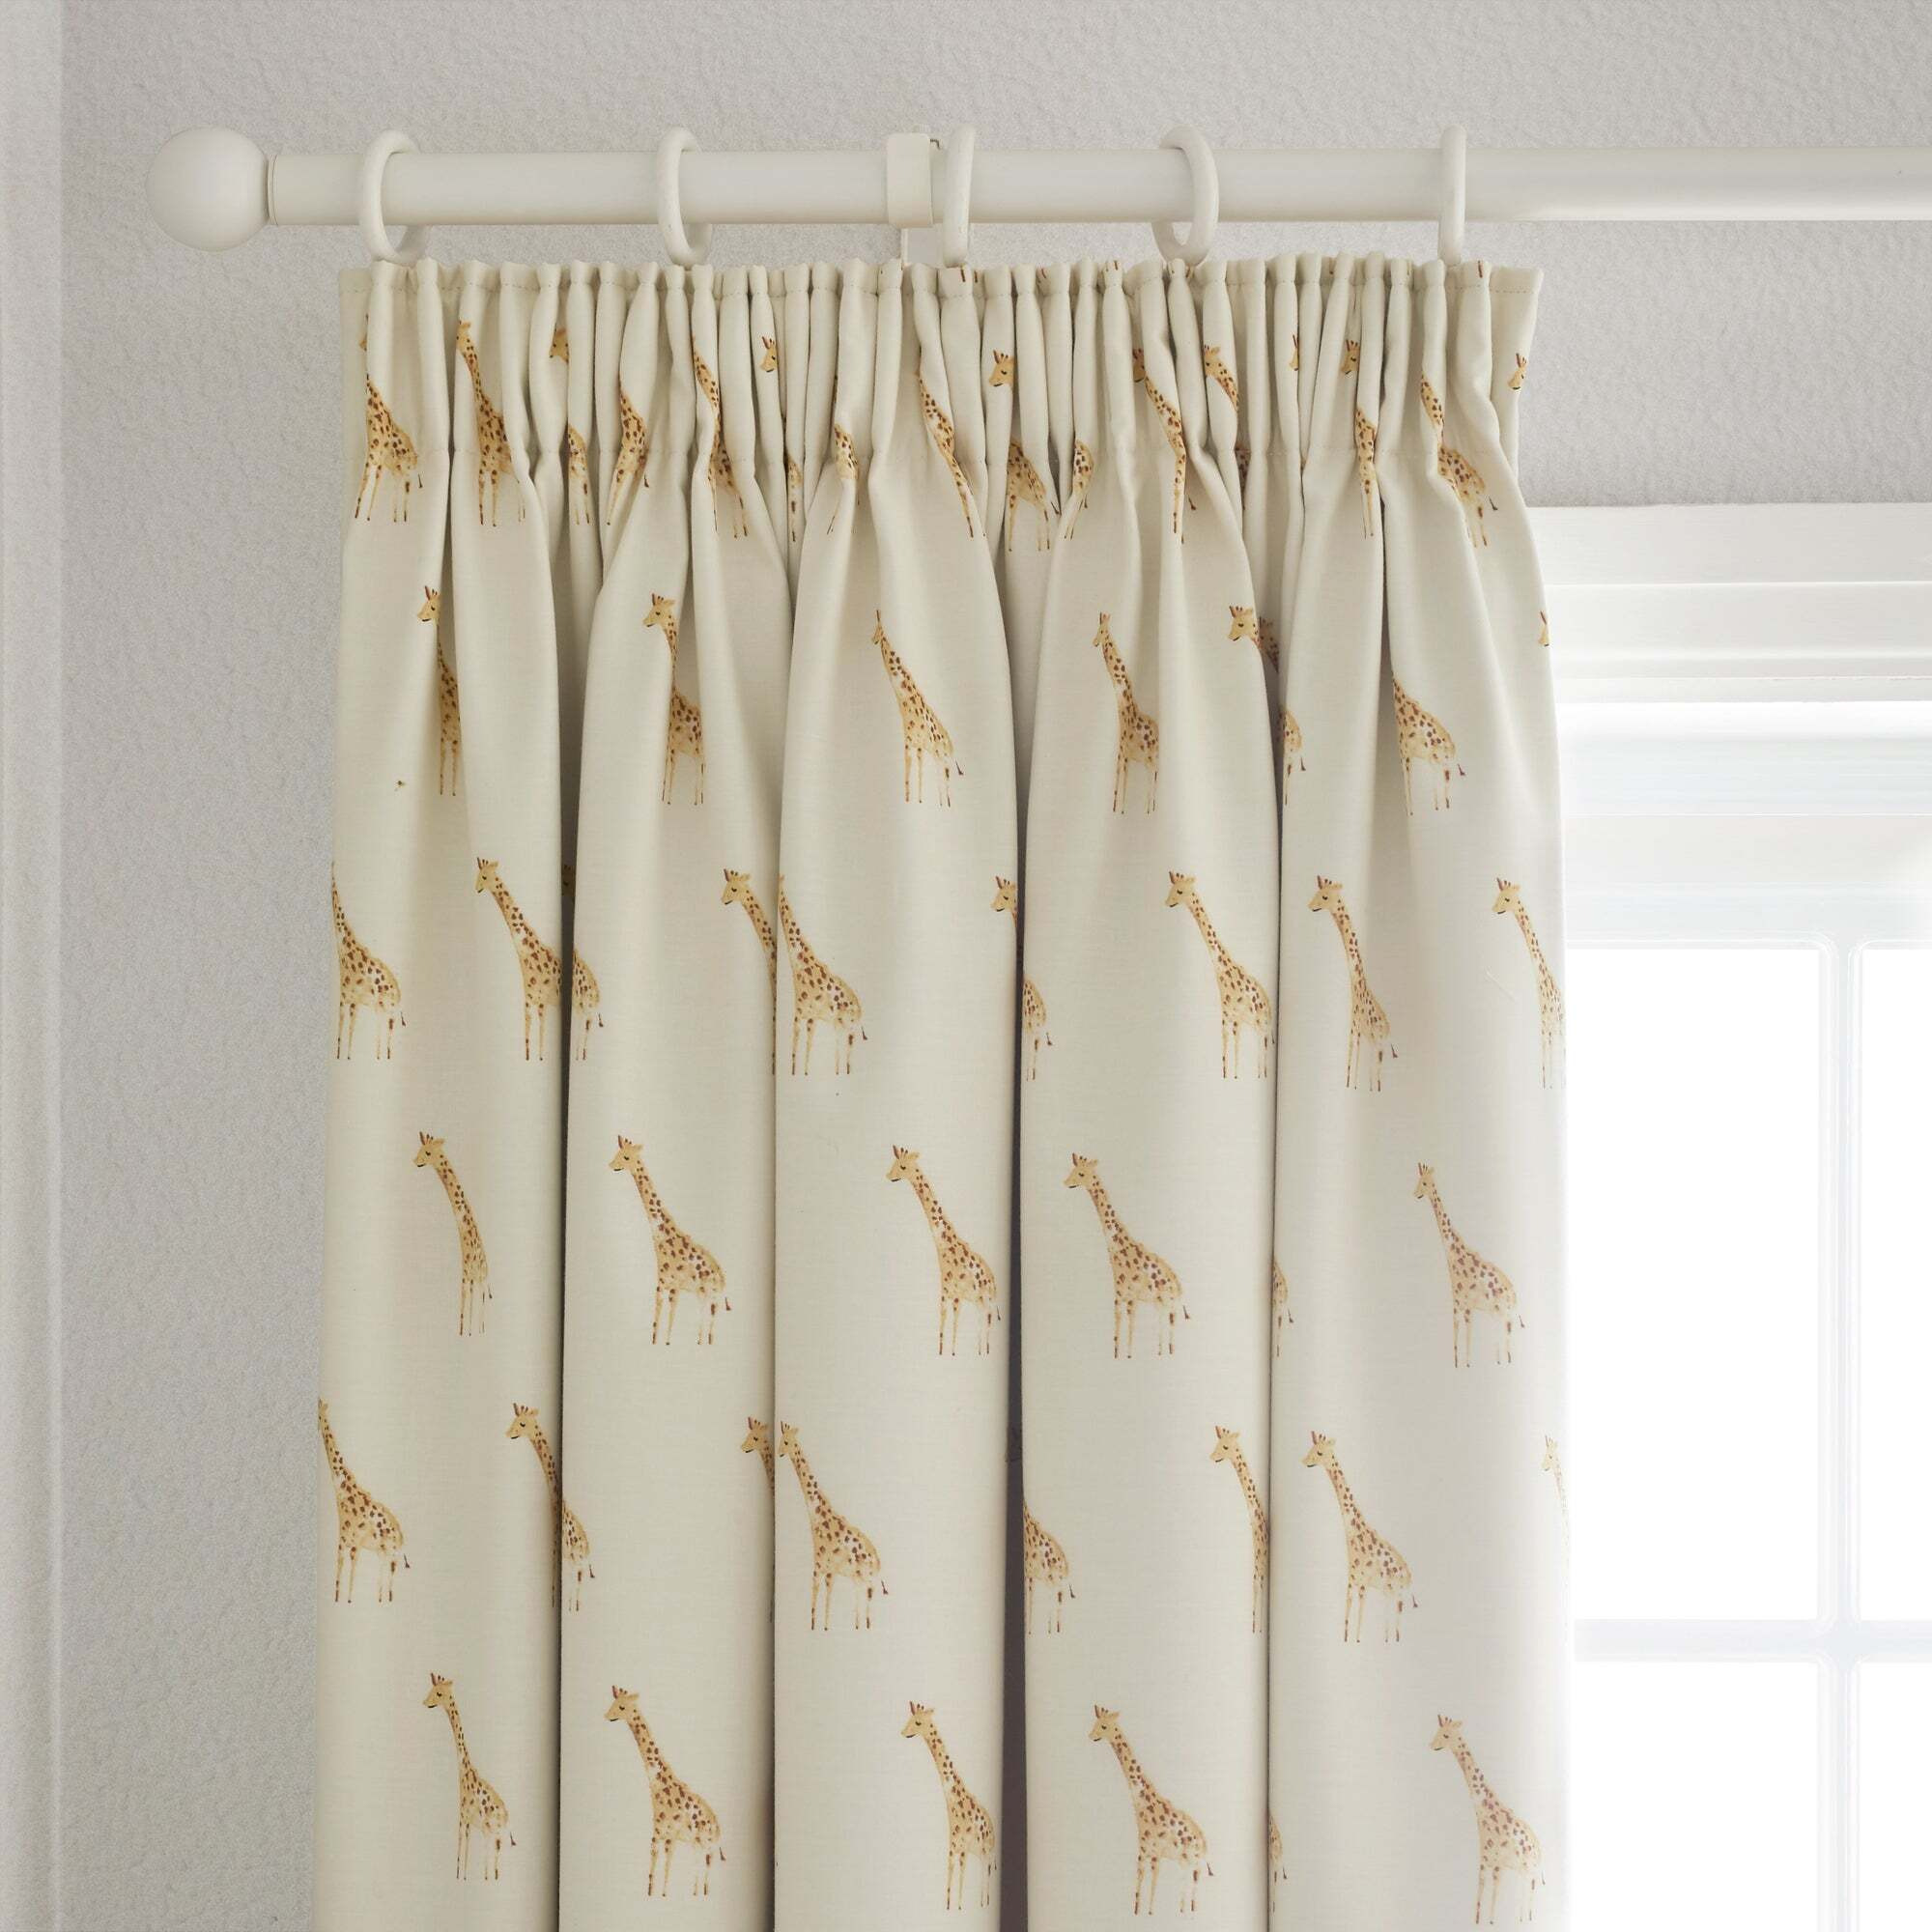 Safari Natural Cotton Thermal Blackout Pencil Pleat Curtains Yellow and Brown